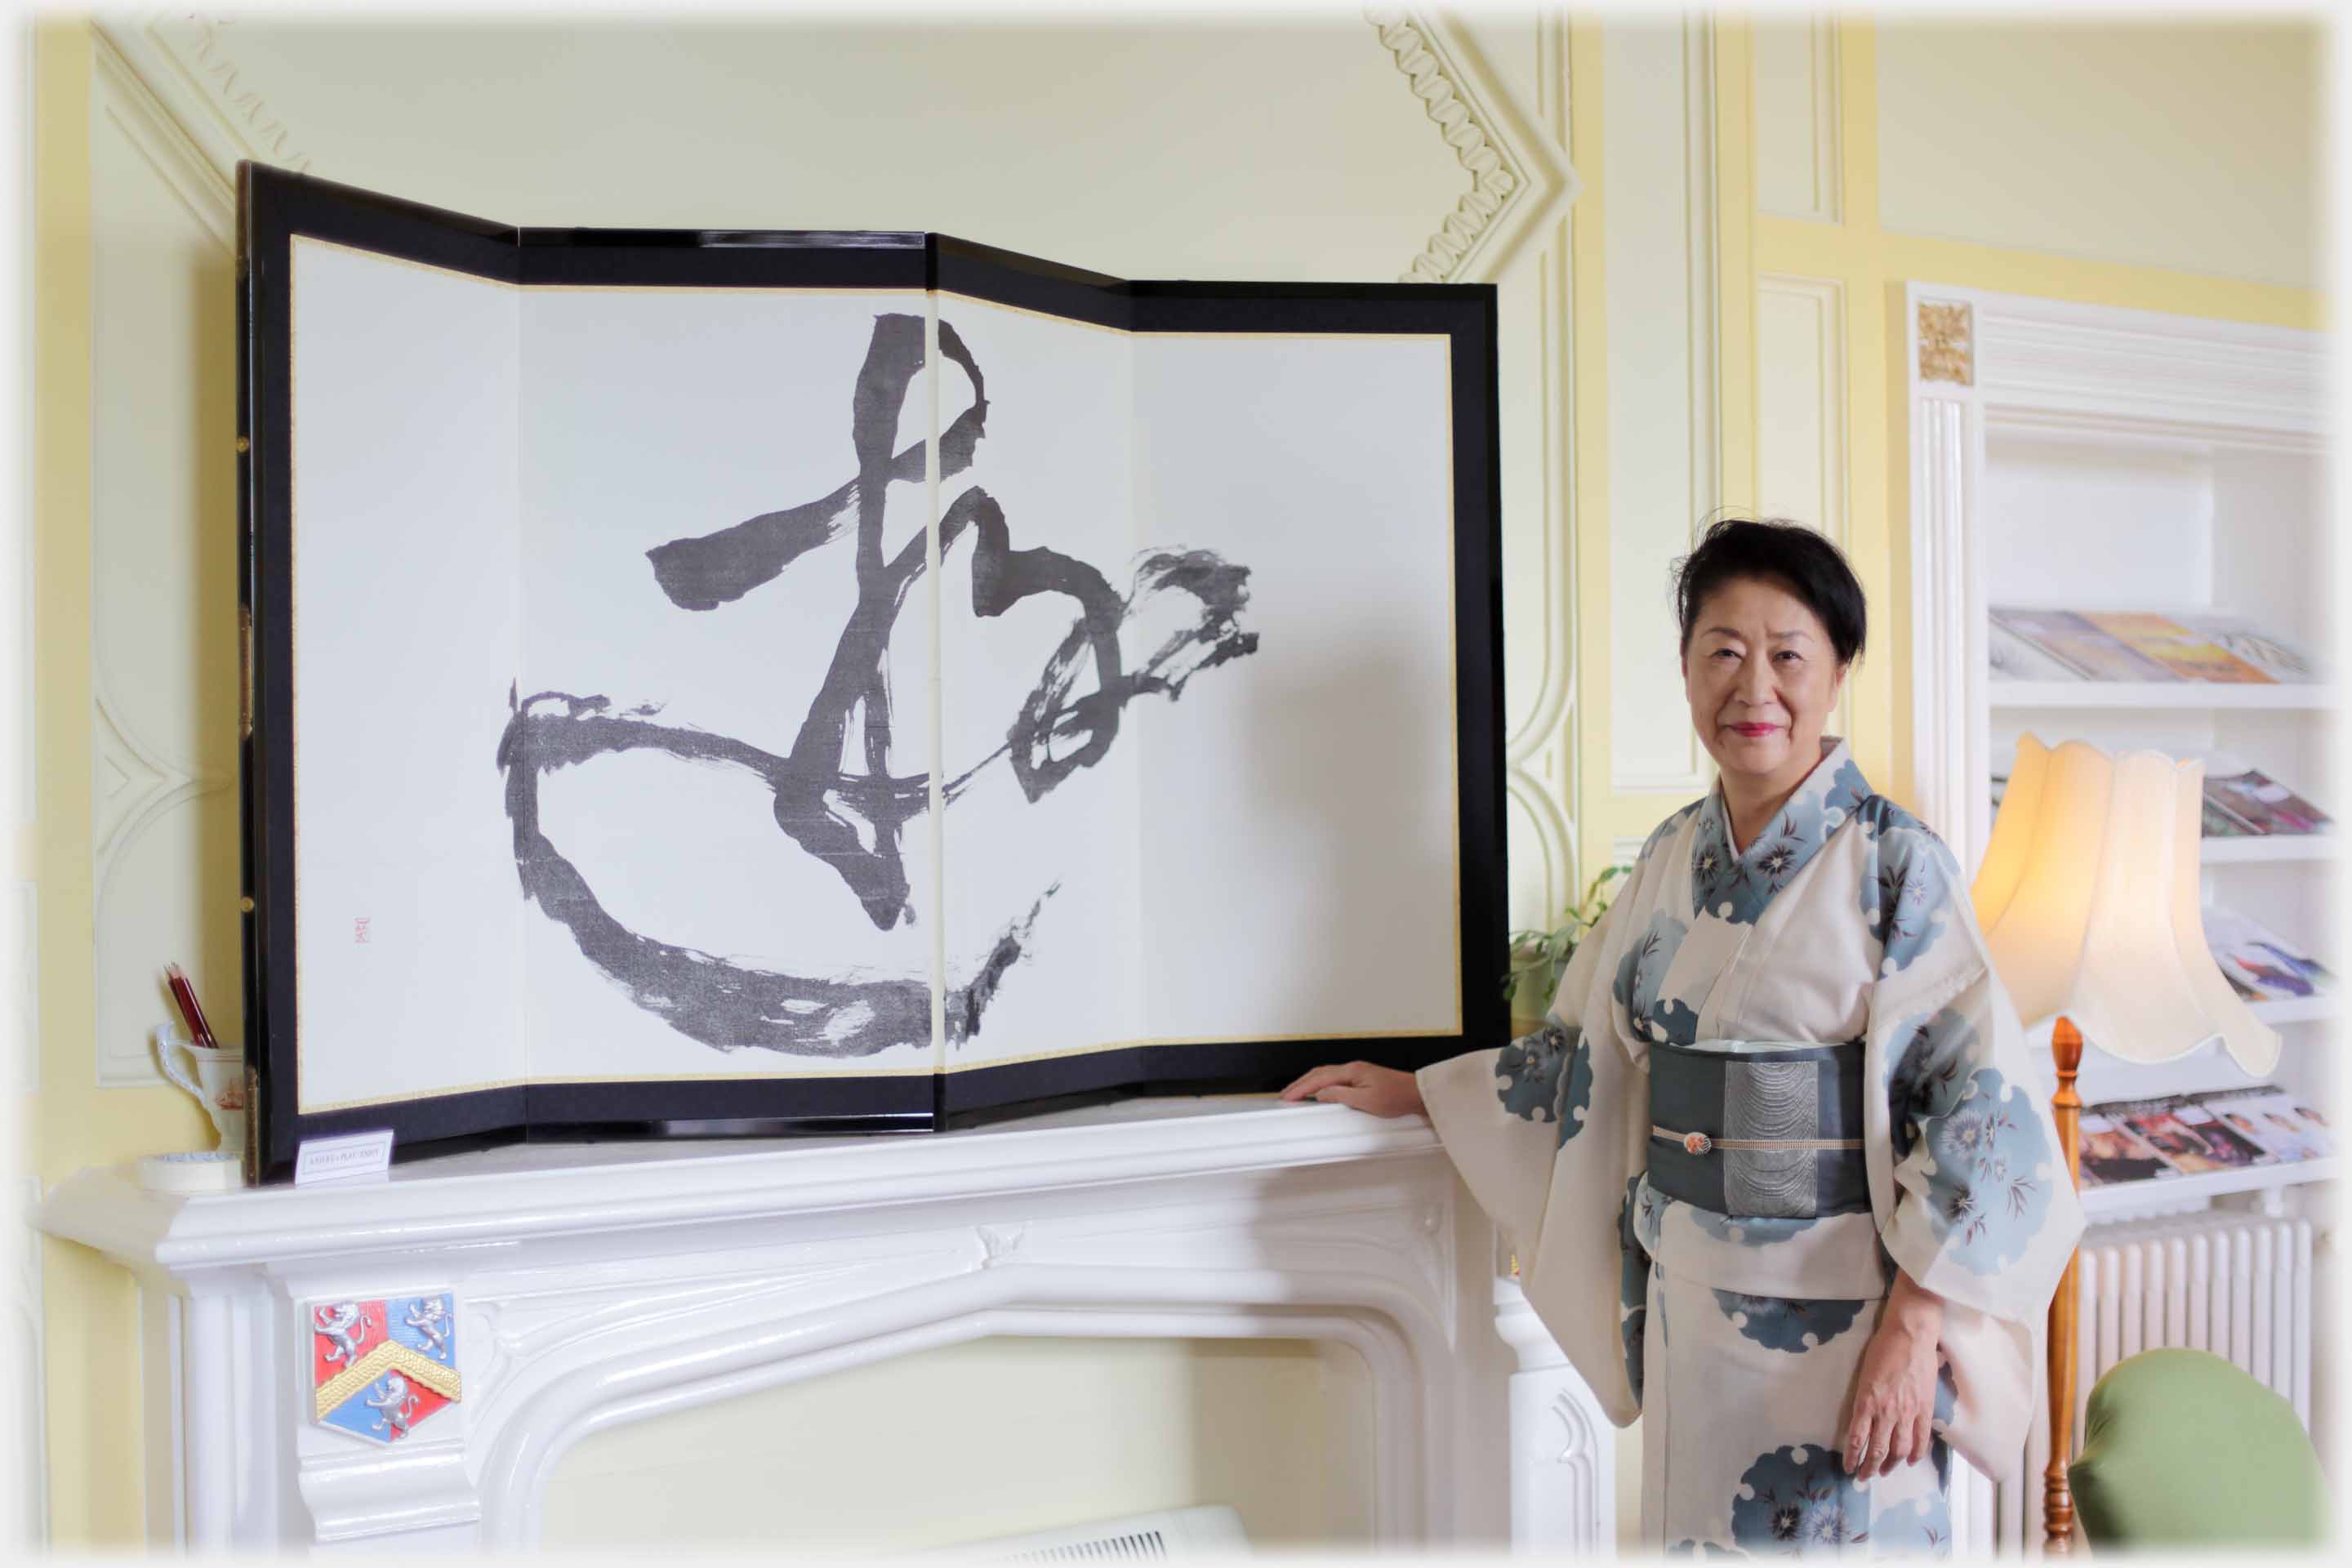 Woman in kimono standing with hand on mantlepiece on which there is a large Japanese calligraphic character.